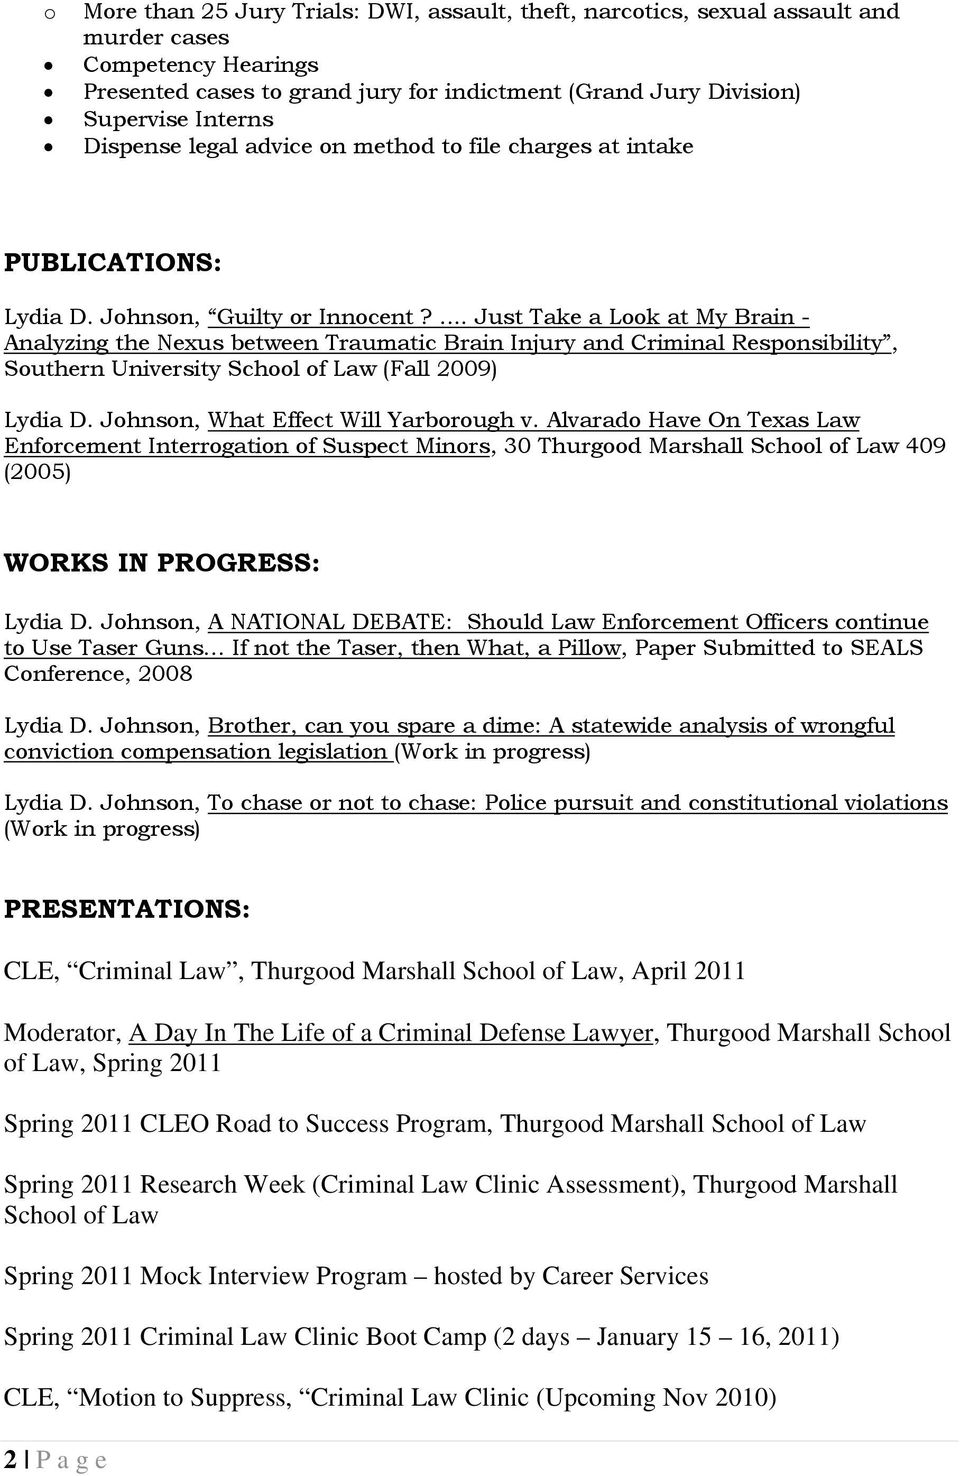 ... Just Take a Look at My Brain - Analyzing the Nexus between Traumatic Brain Injury and Criminal Responsibility, Southern University School of Law (Fall 2009) Lydia D.